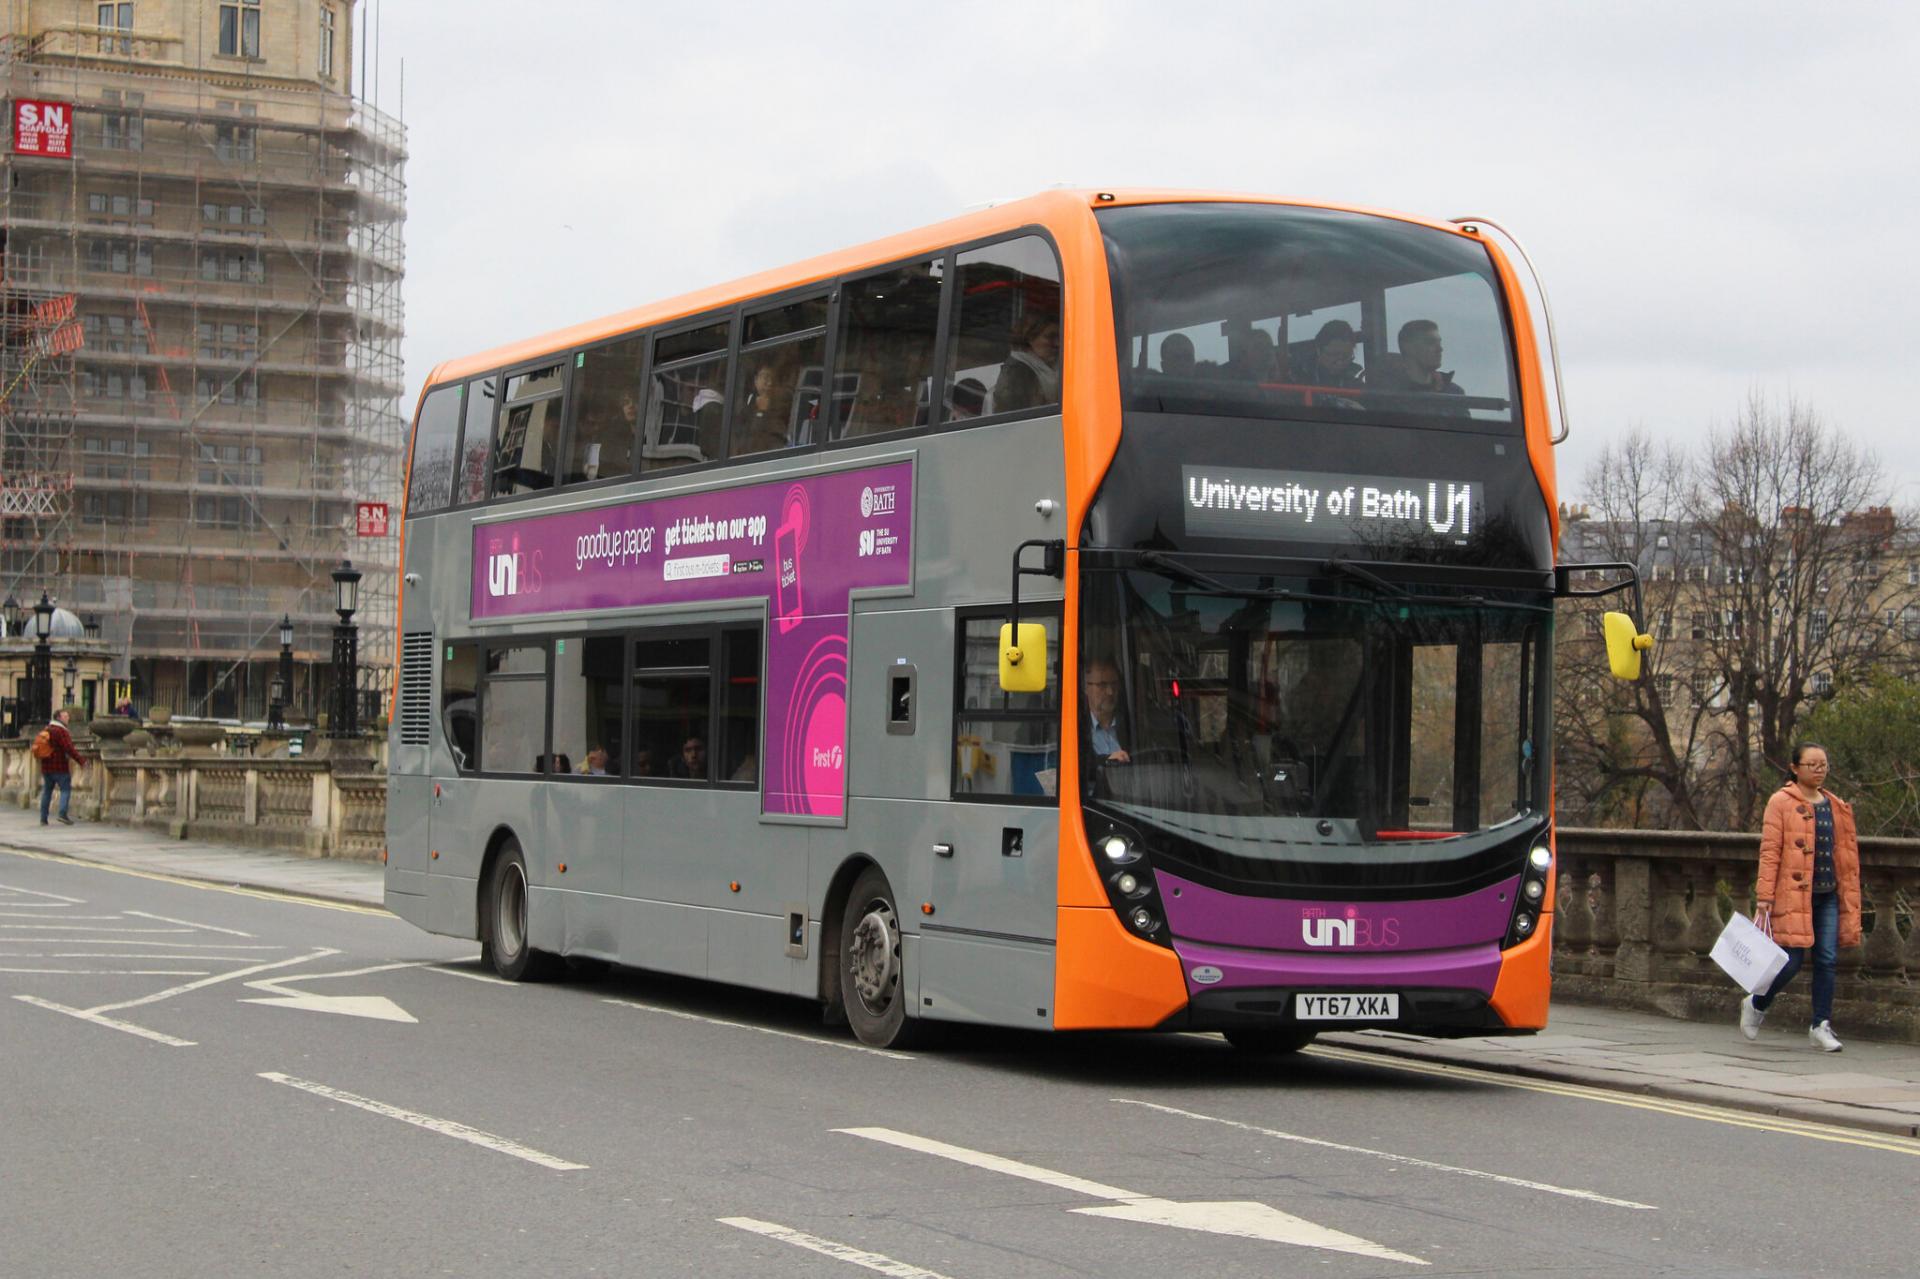 West Country bus company up for sale